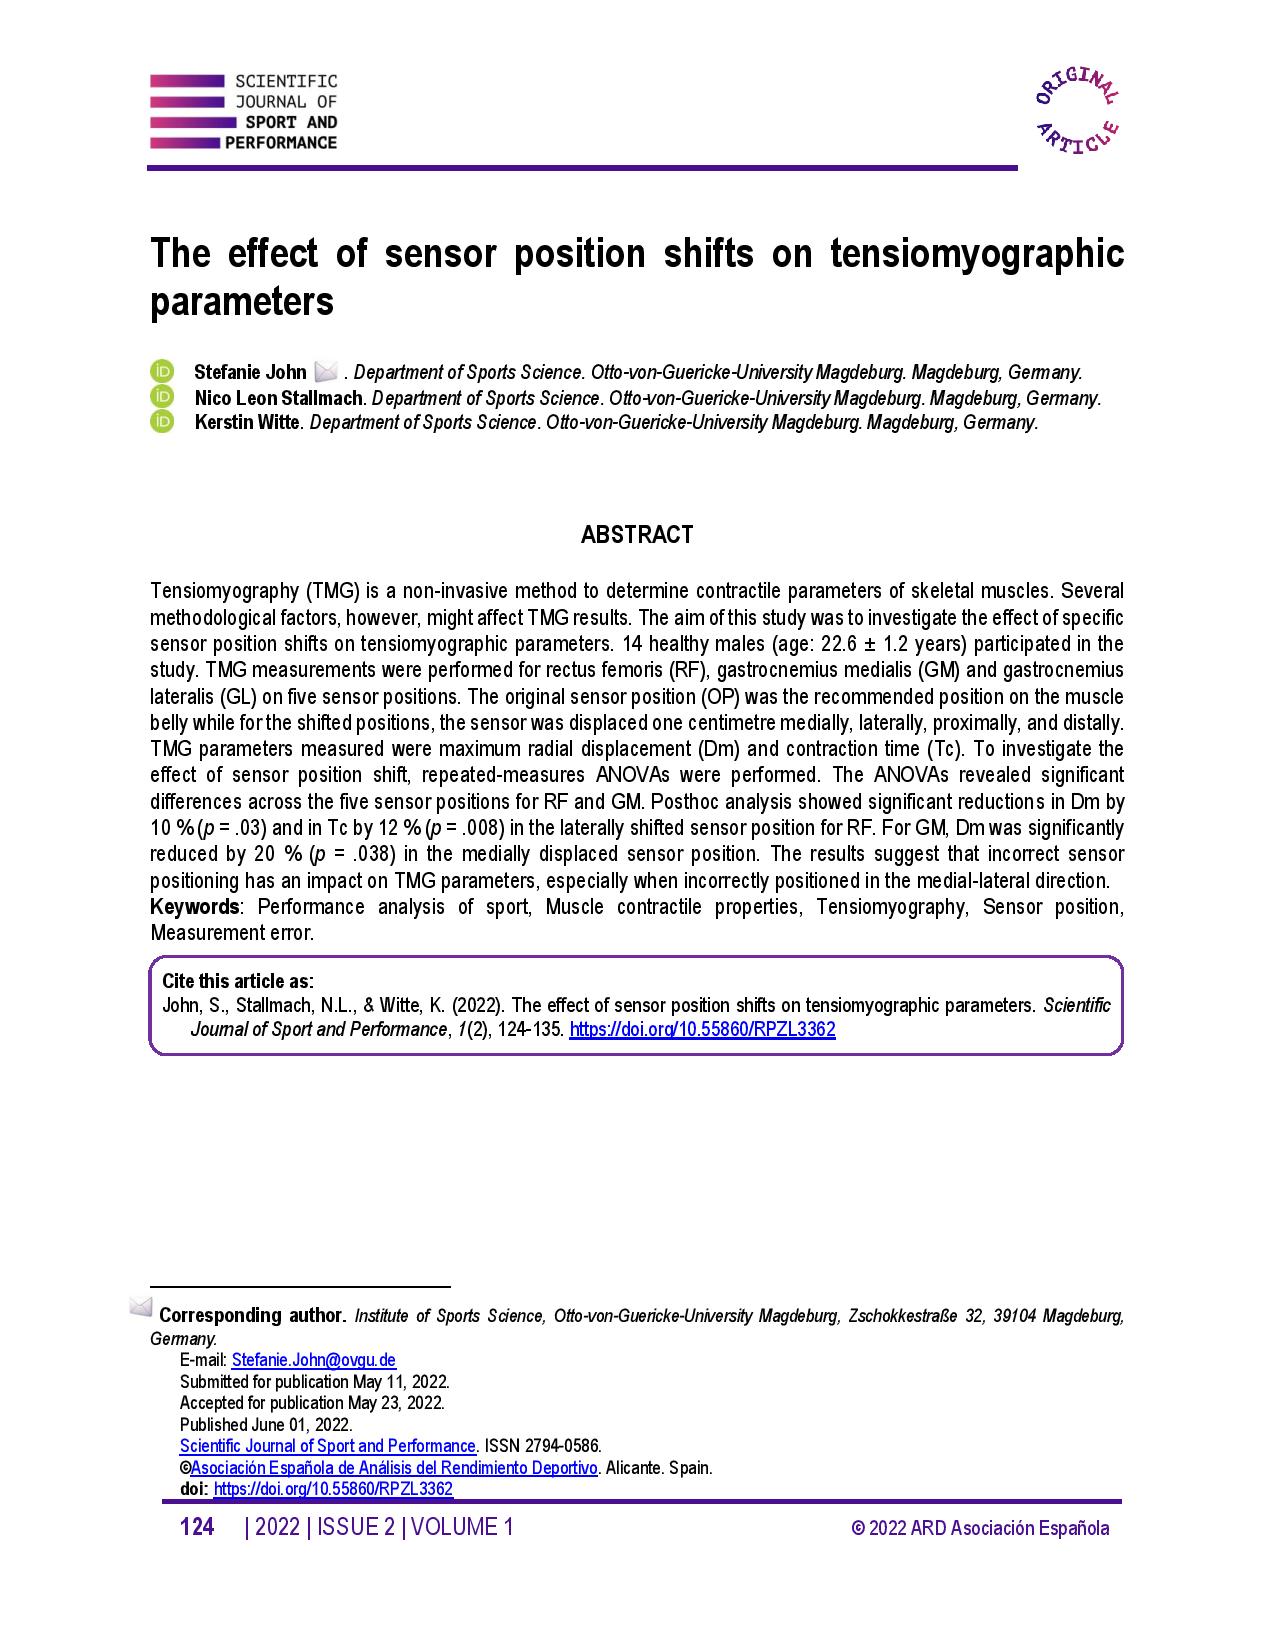 The effect of sensor position shifts on tensiomyographic parameters